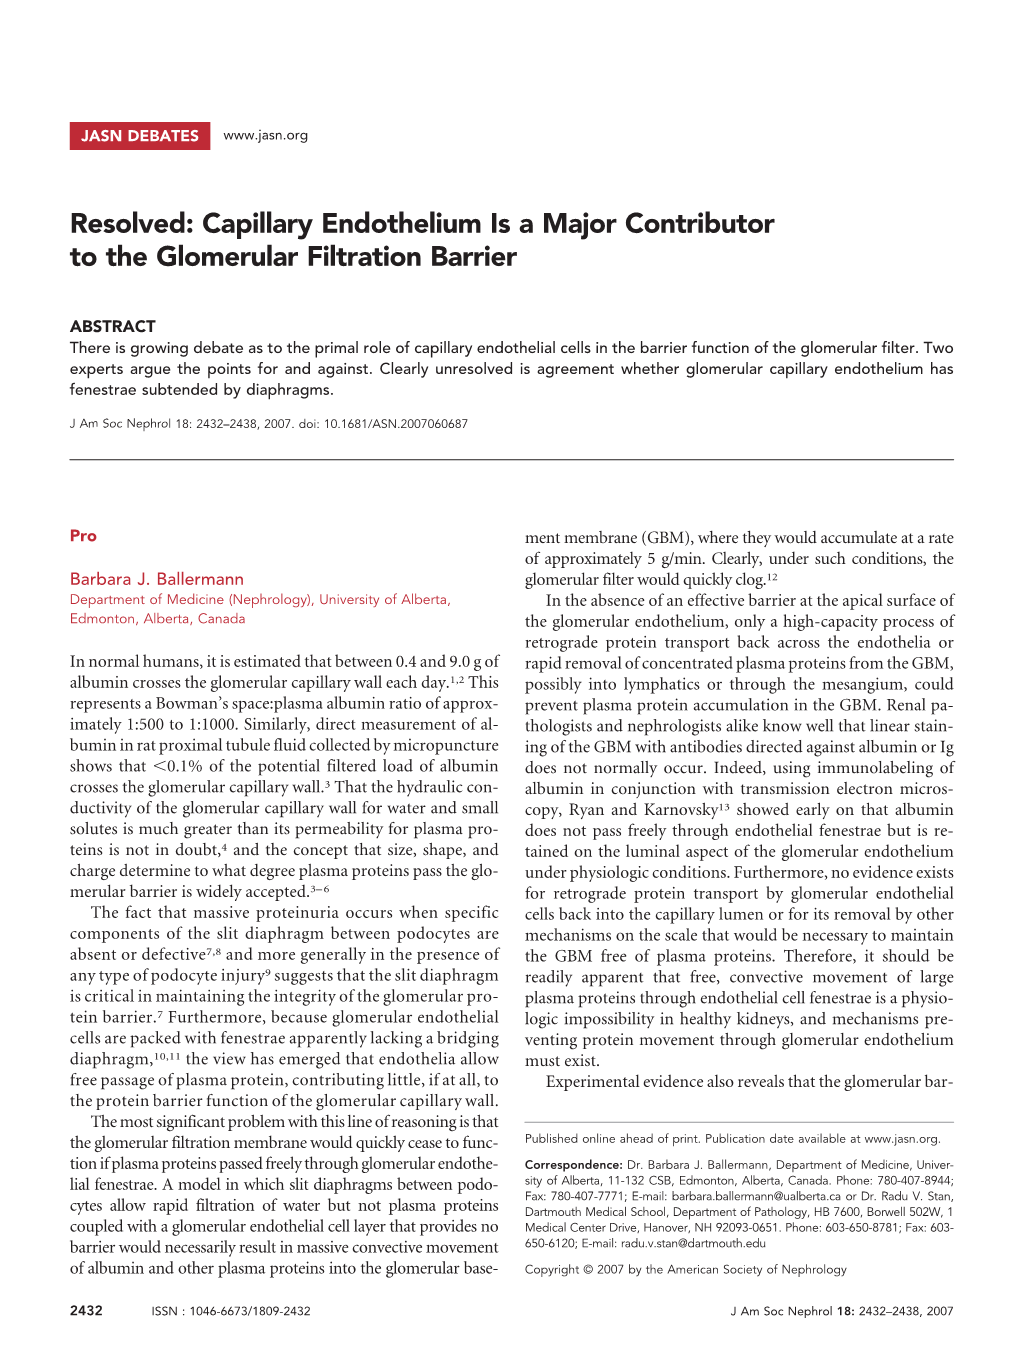 Resolved: Capillary Endothelium Is a Major Contributor to the Glomerular Filtration Barrier